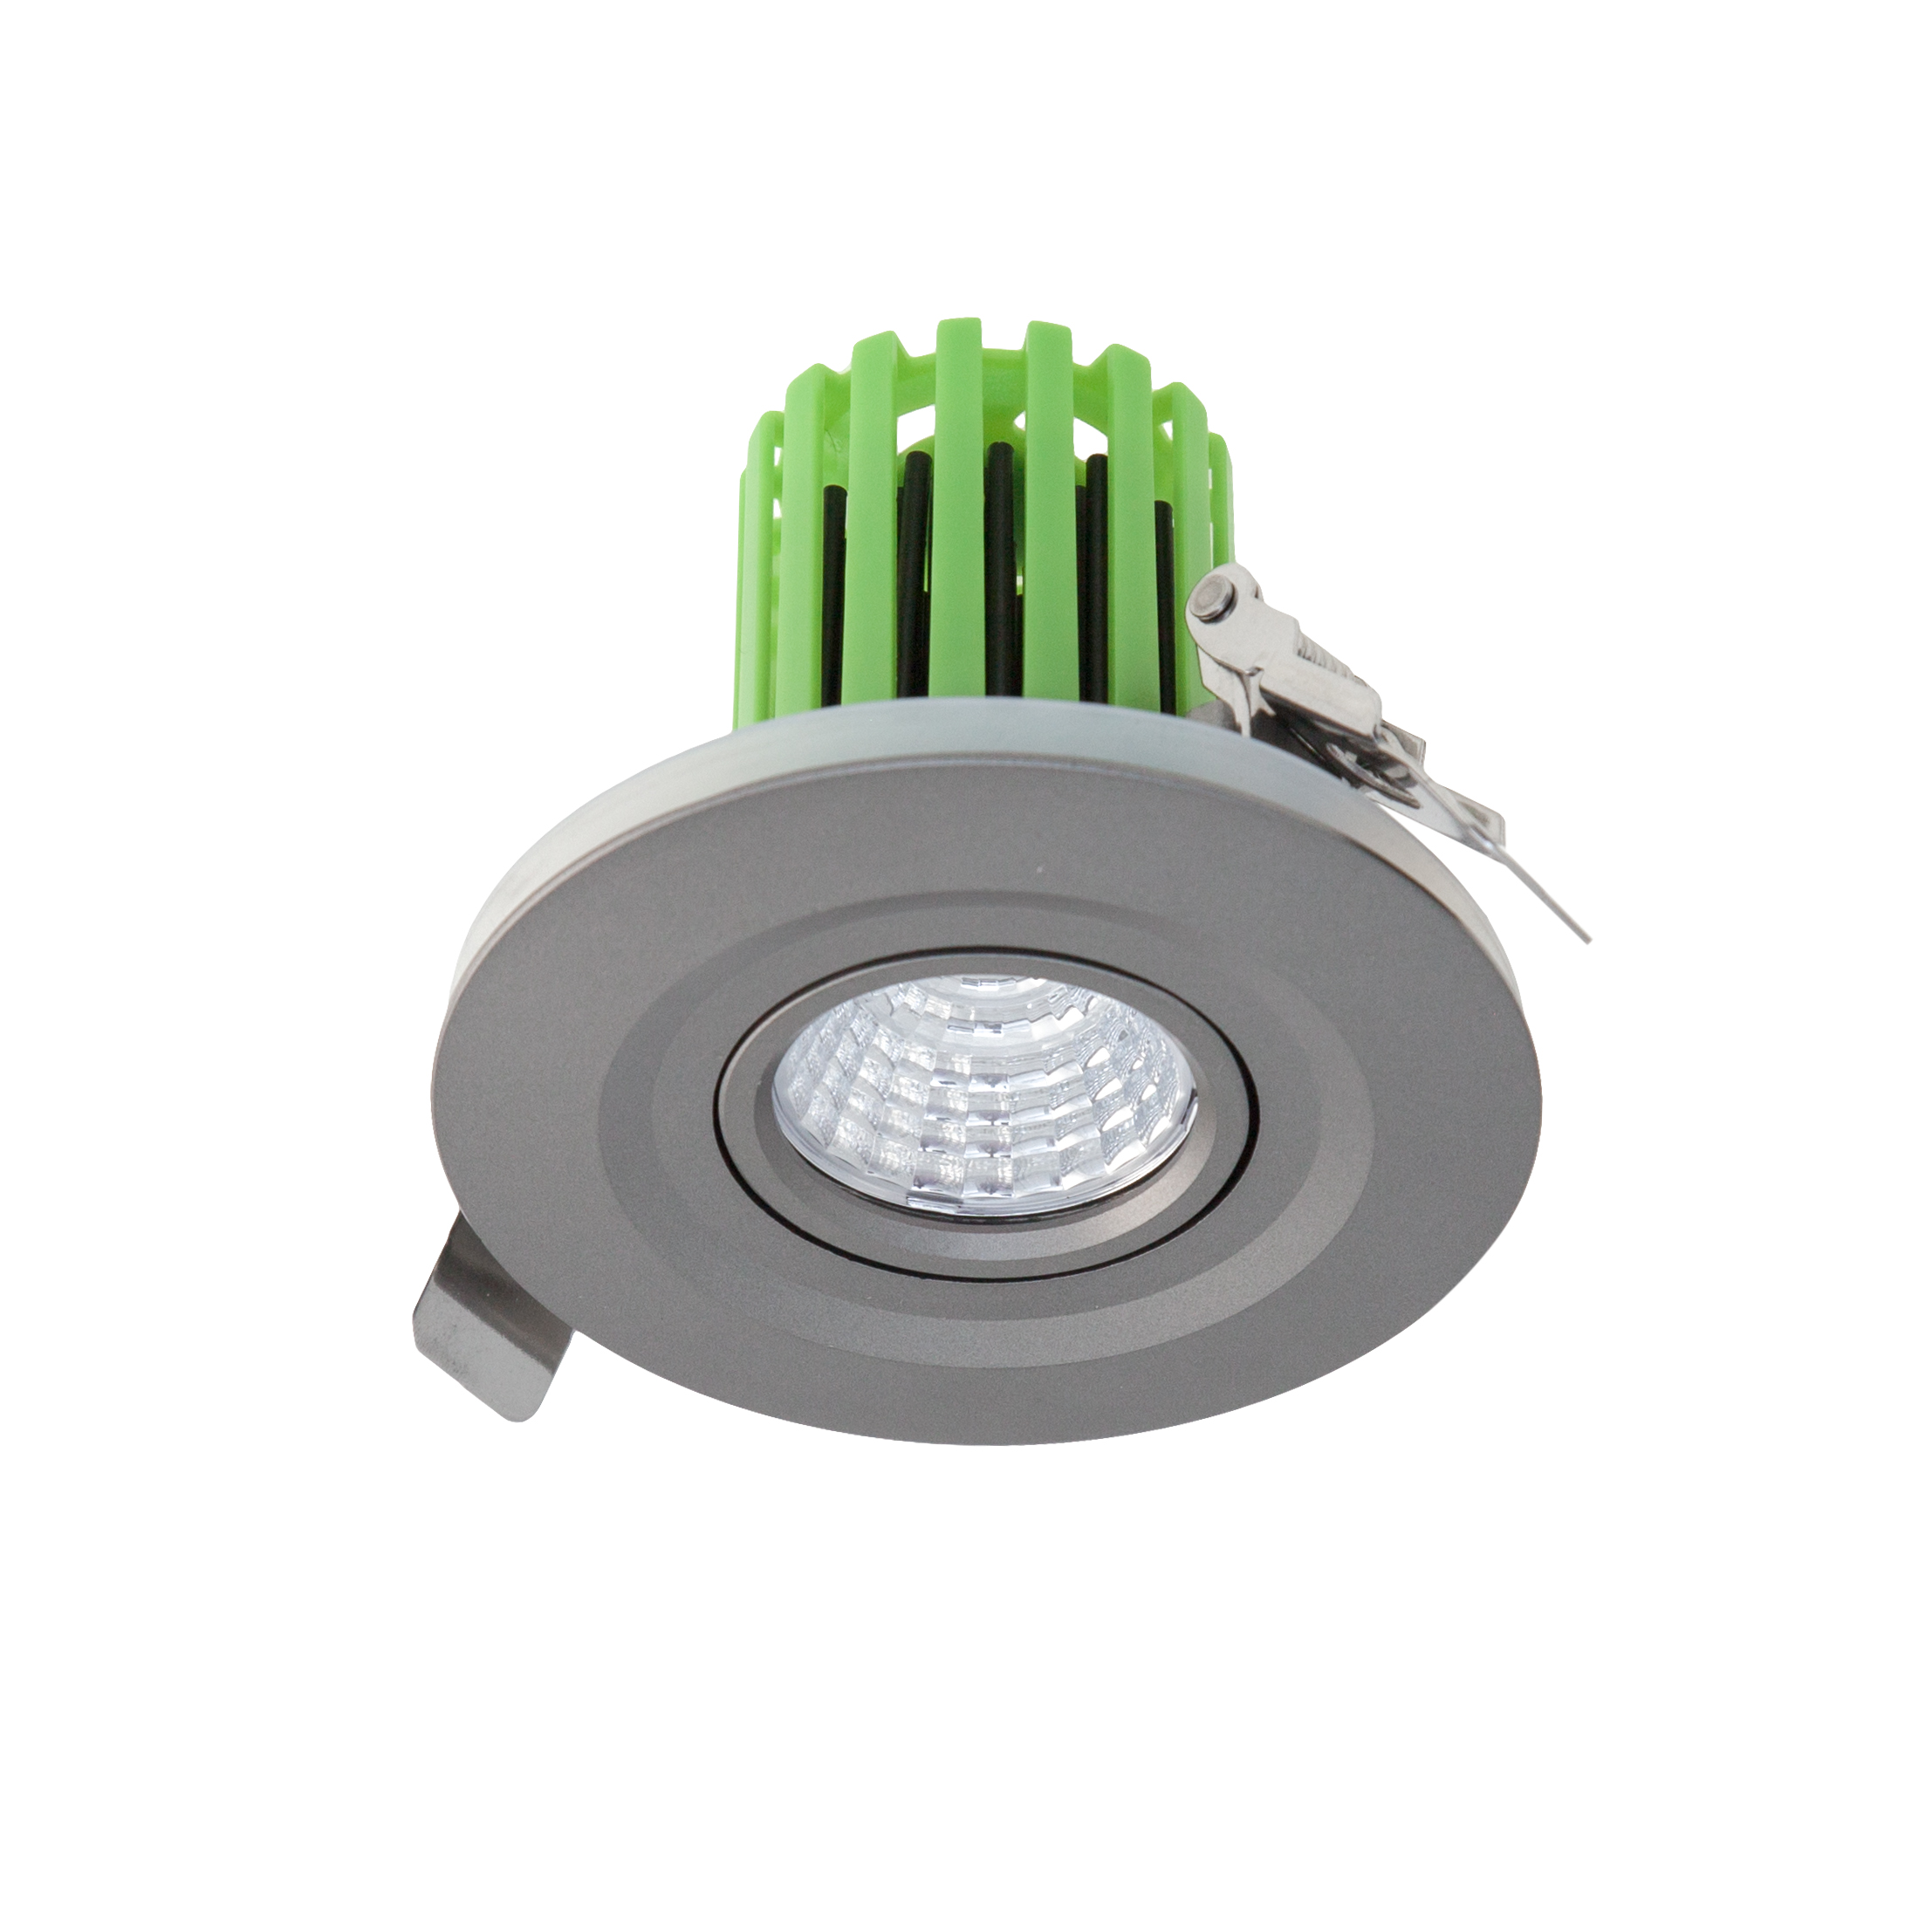 Exterior Downlight LED Recessed Round Tilt c/w UID Dimmable Driver 12W 260mA CC 3K-Stainless Steel